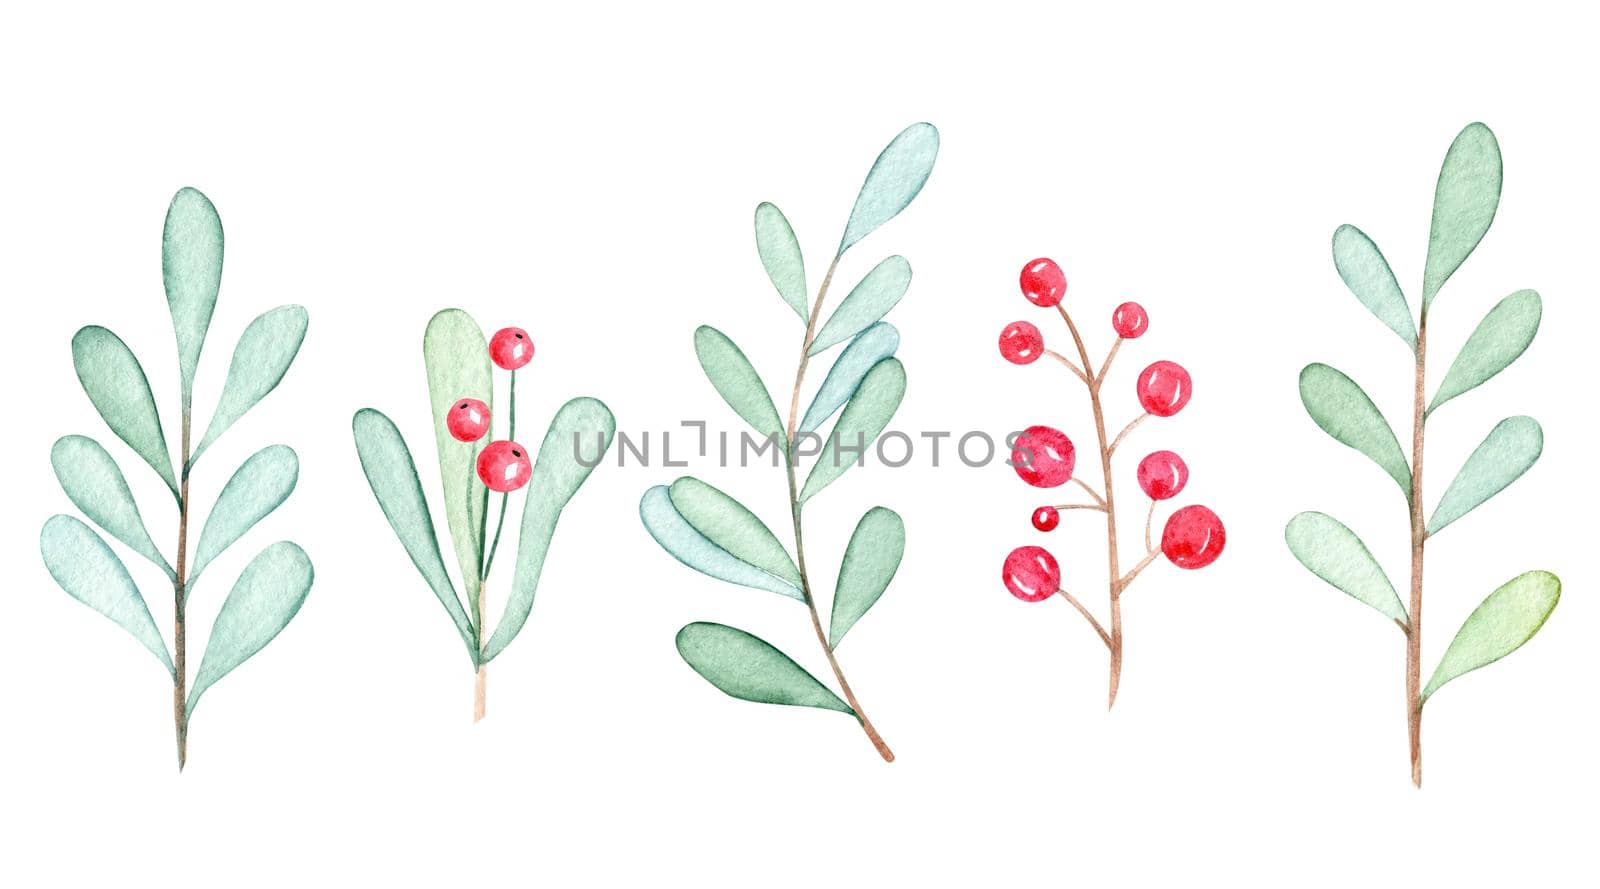 Watercolor mistletoe branches set isolated on white background. Winter greenery and red berries collection hand drawn illustrations